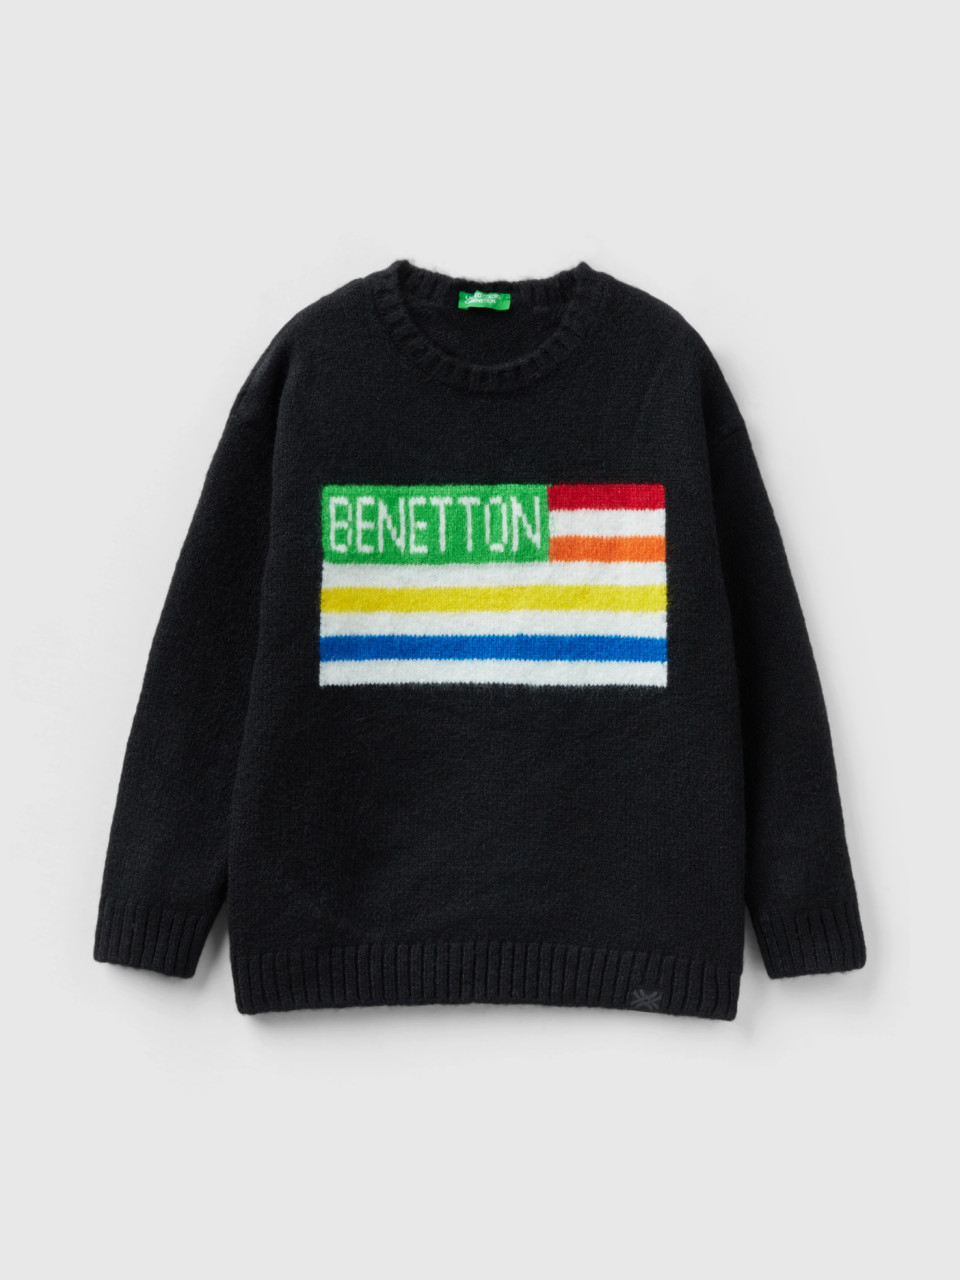 Benetton, Sweater With Flag Inlay, Black, Kids